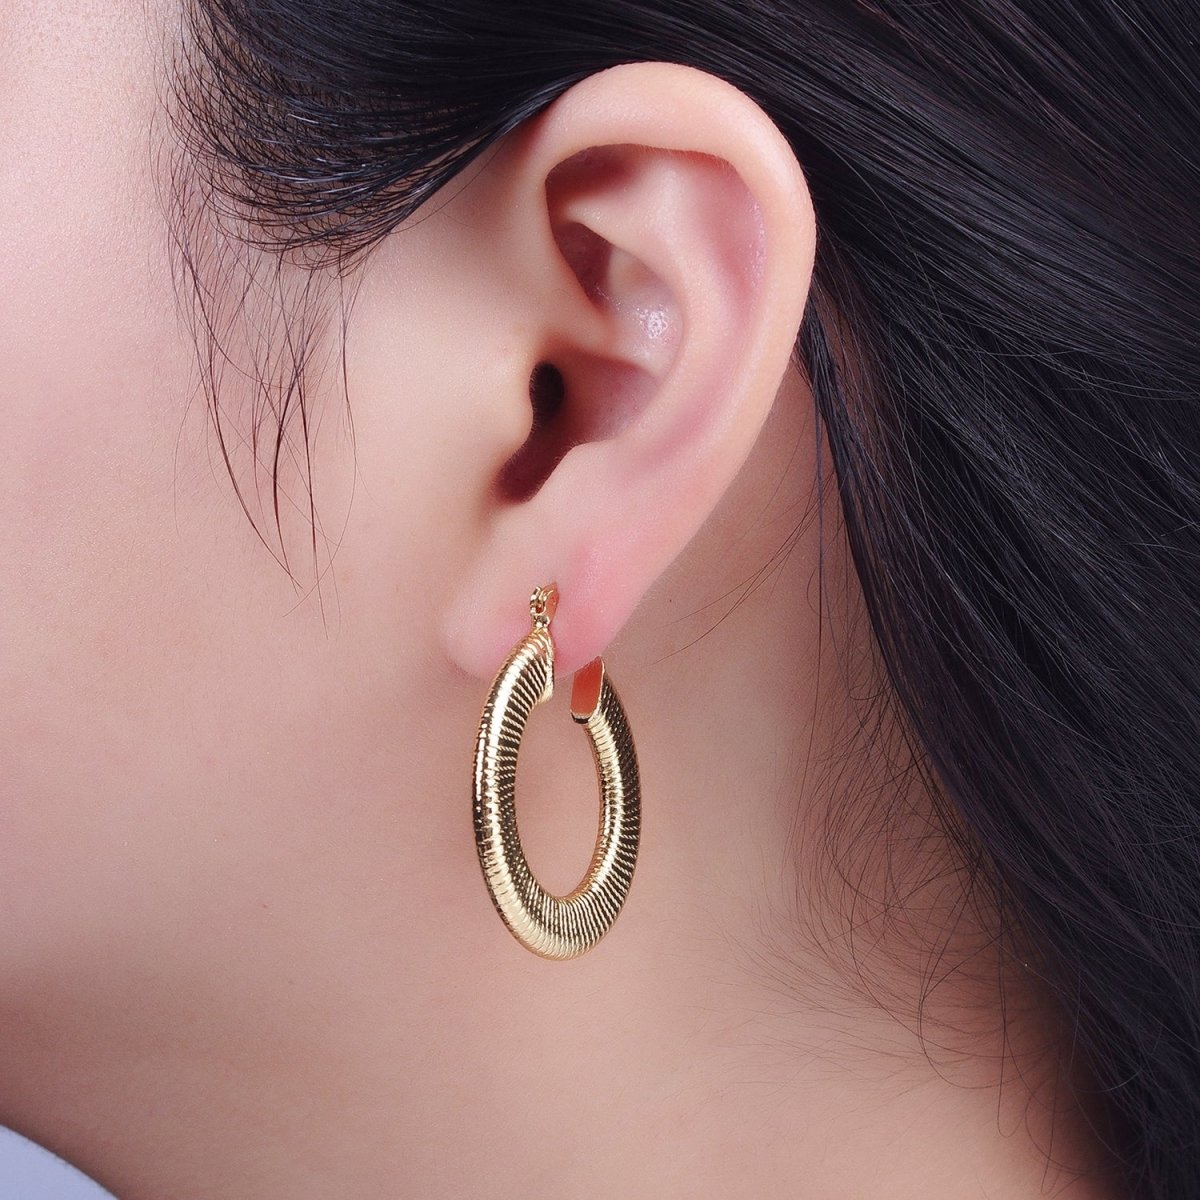 Unique Gold Hoops Line Pattern Earring for Fashion Statement Jewelry T-023 - DLUXCA